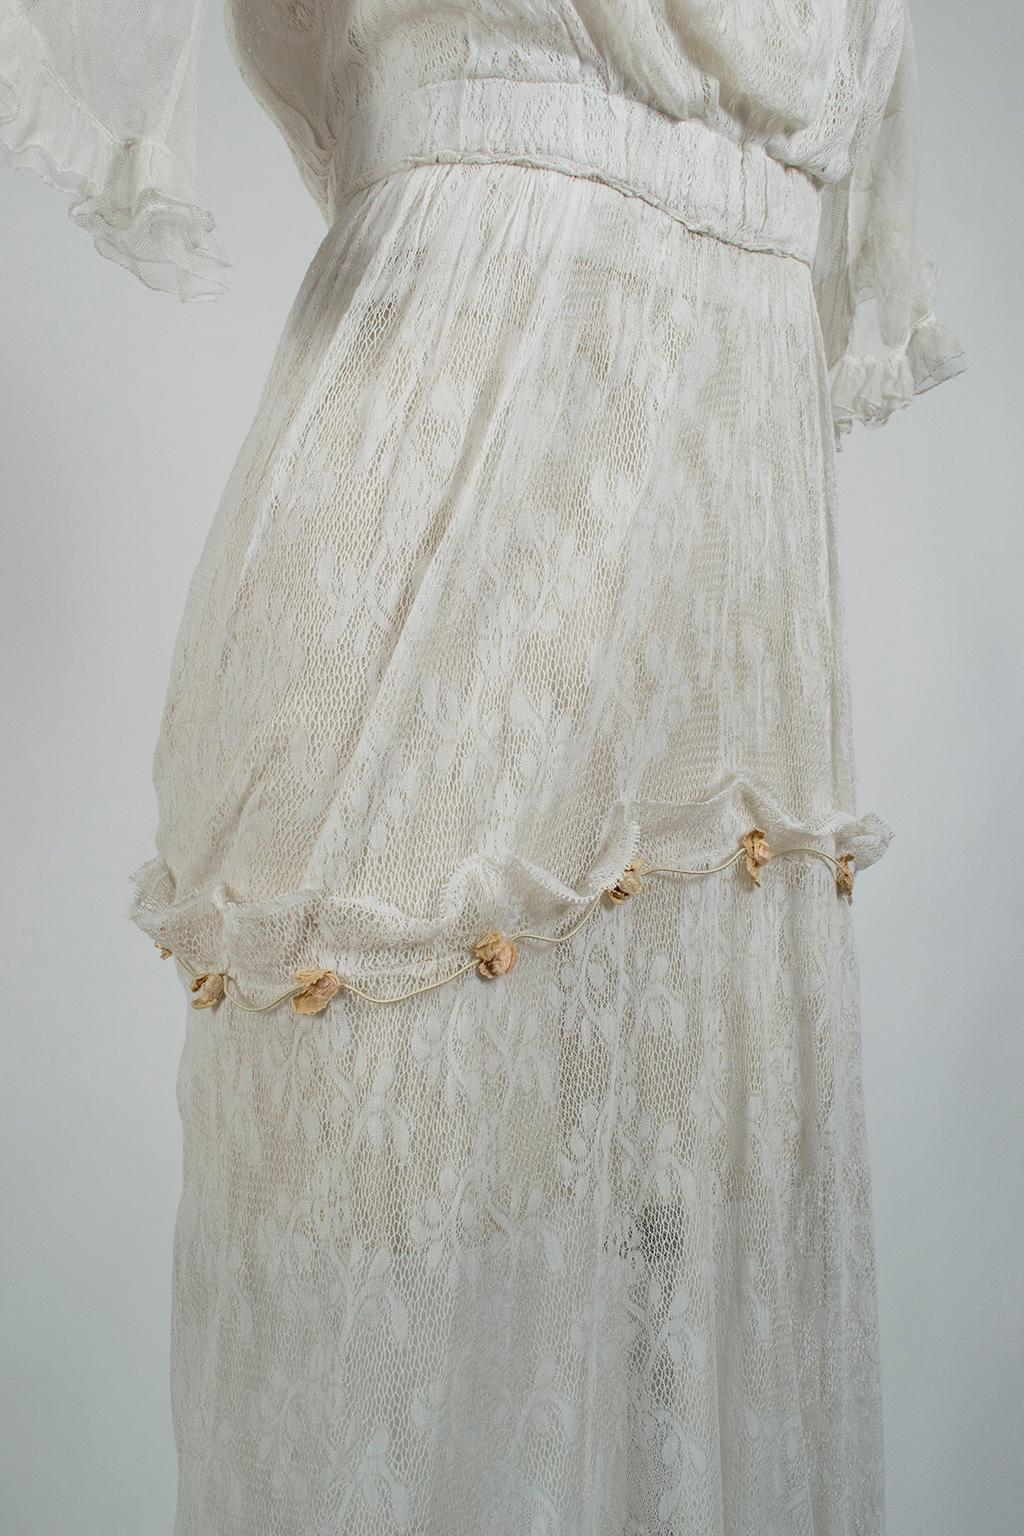 White Edwardian Net Rosebud Afternoon Tea or Bridal Gown - XXS, Early 1900s For Sale 6